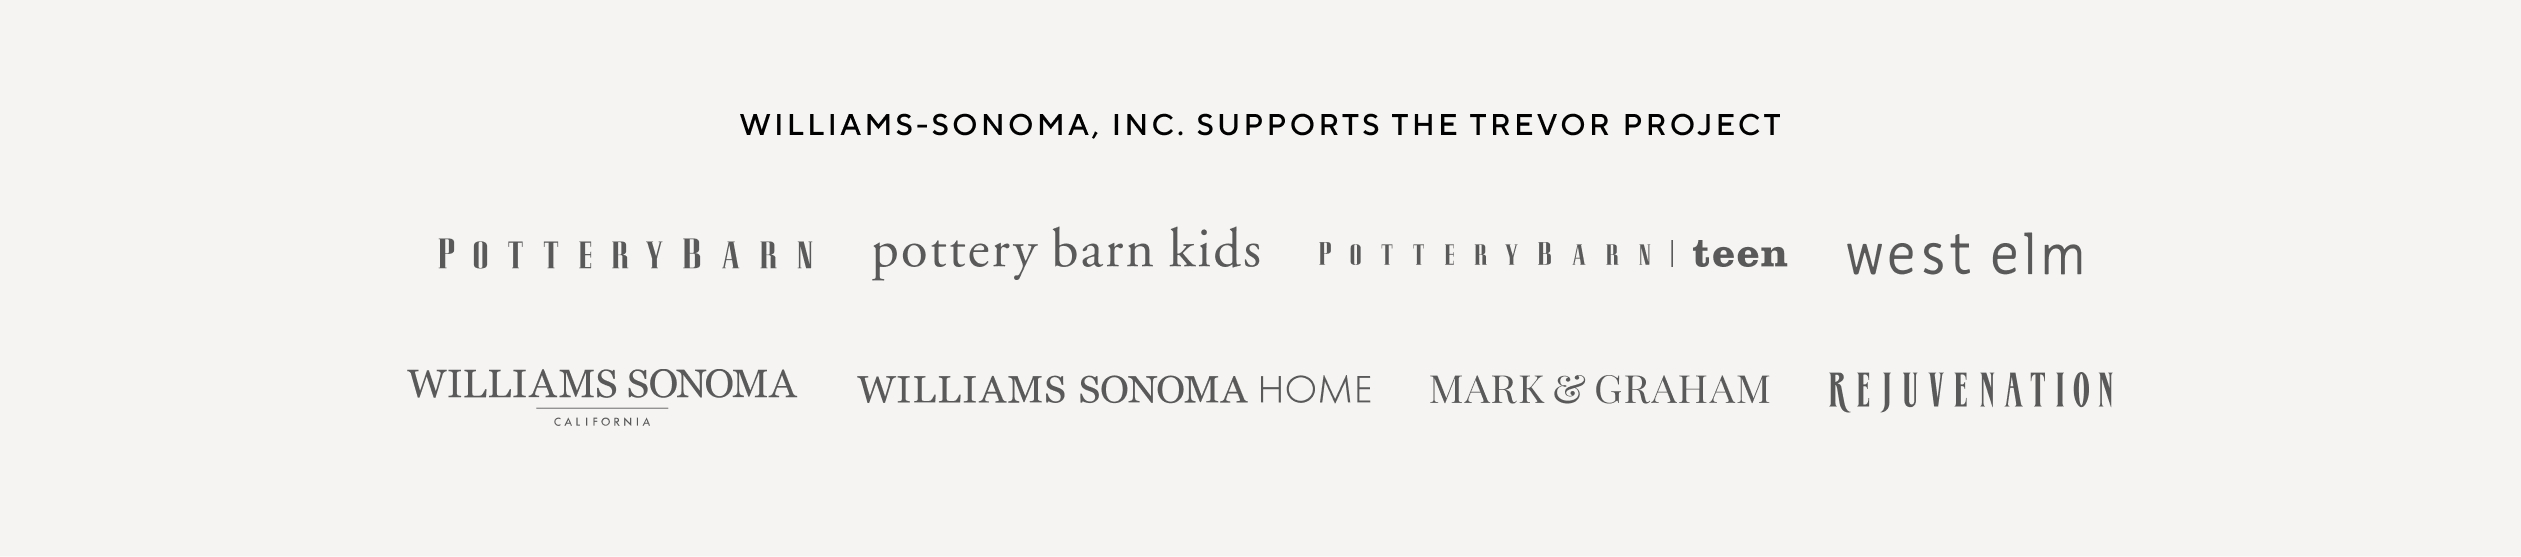 Williams Sonoma supports the Trevor Project